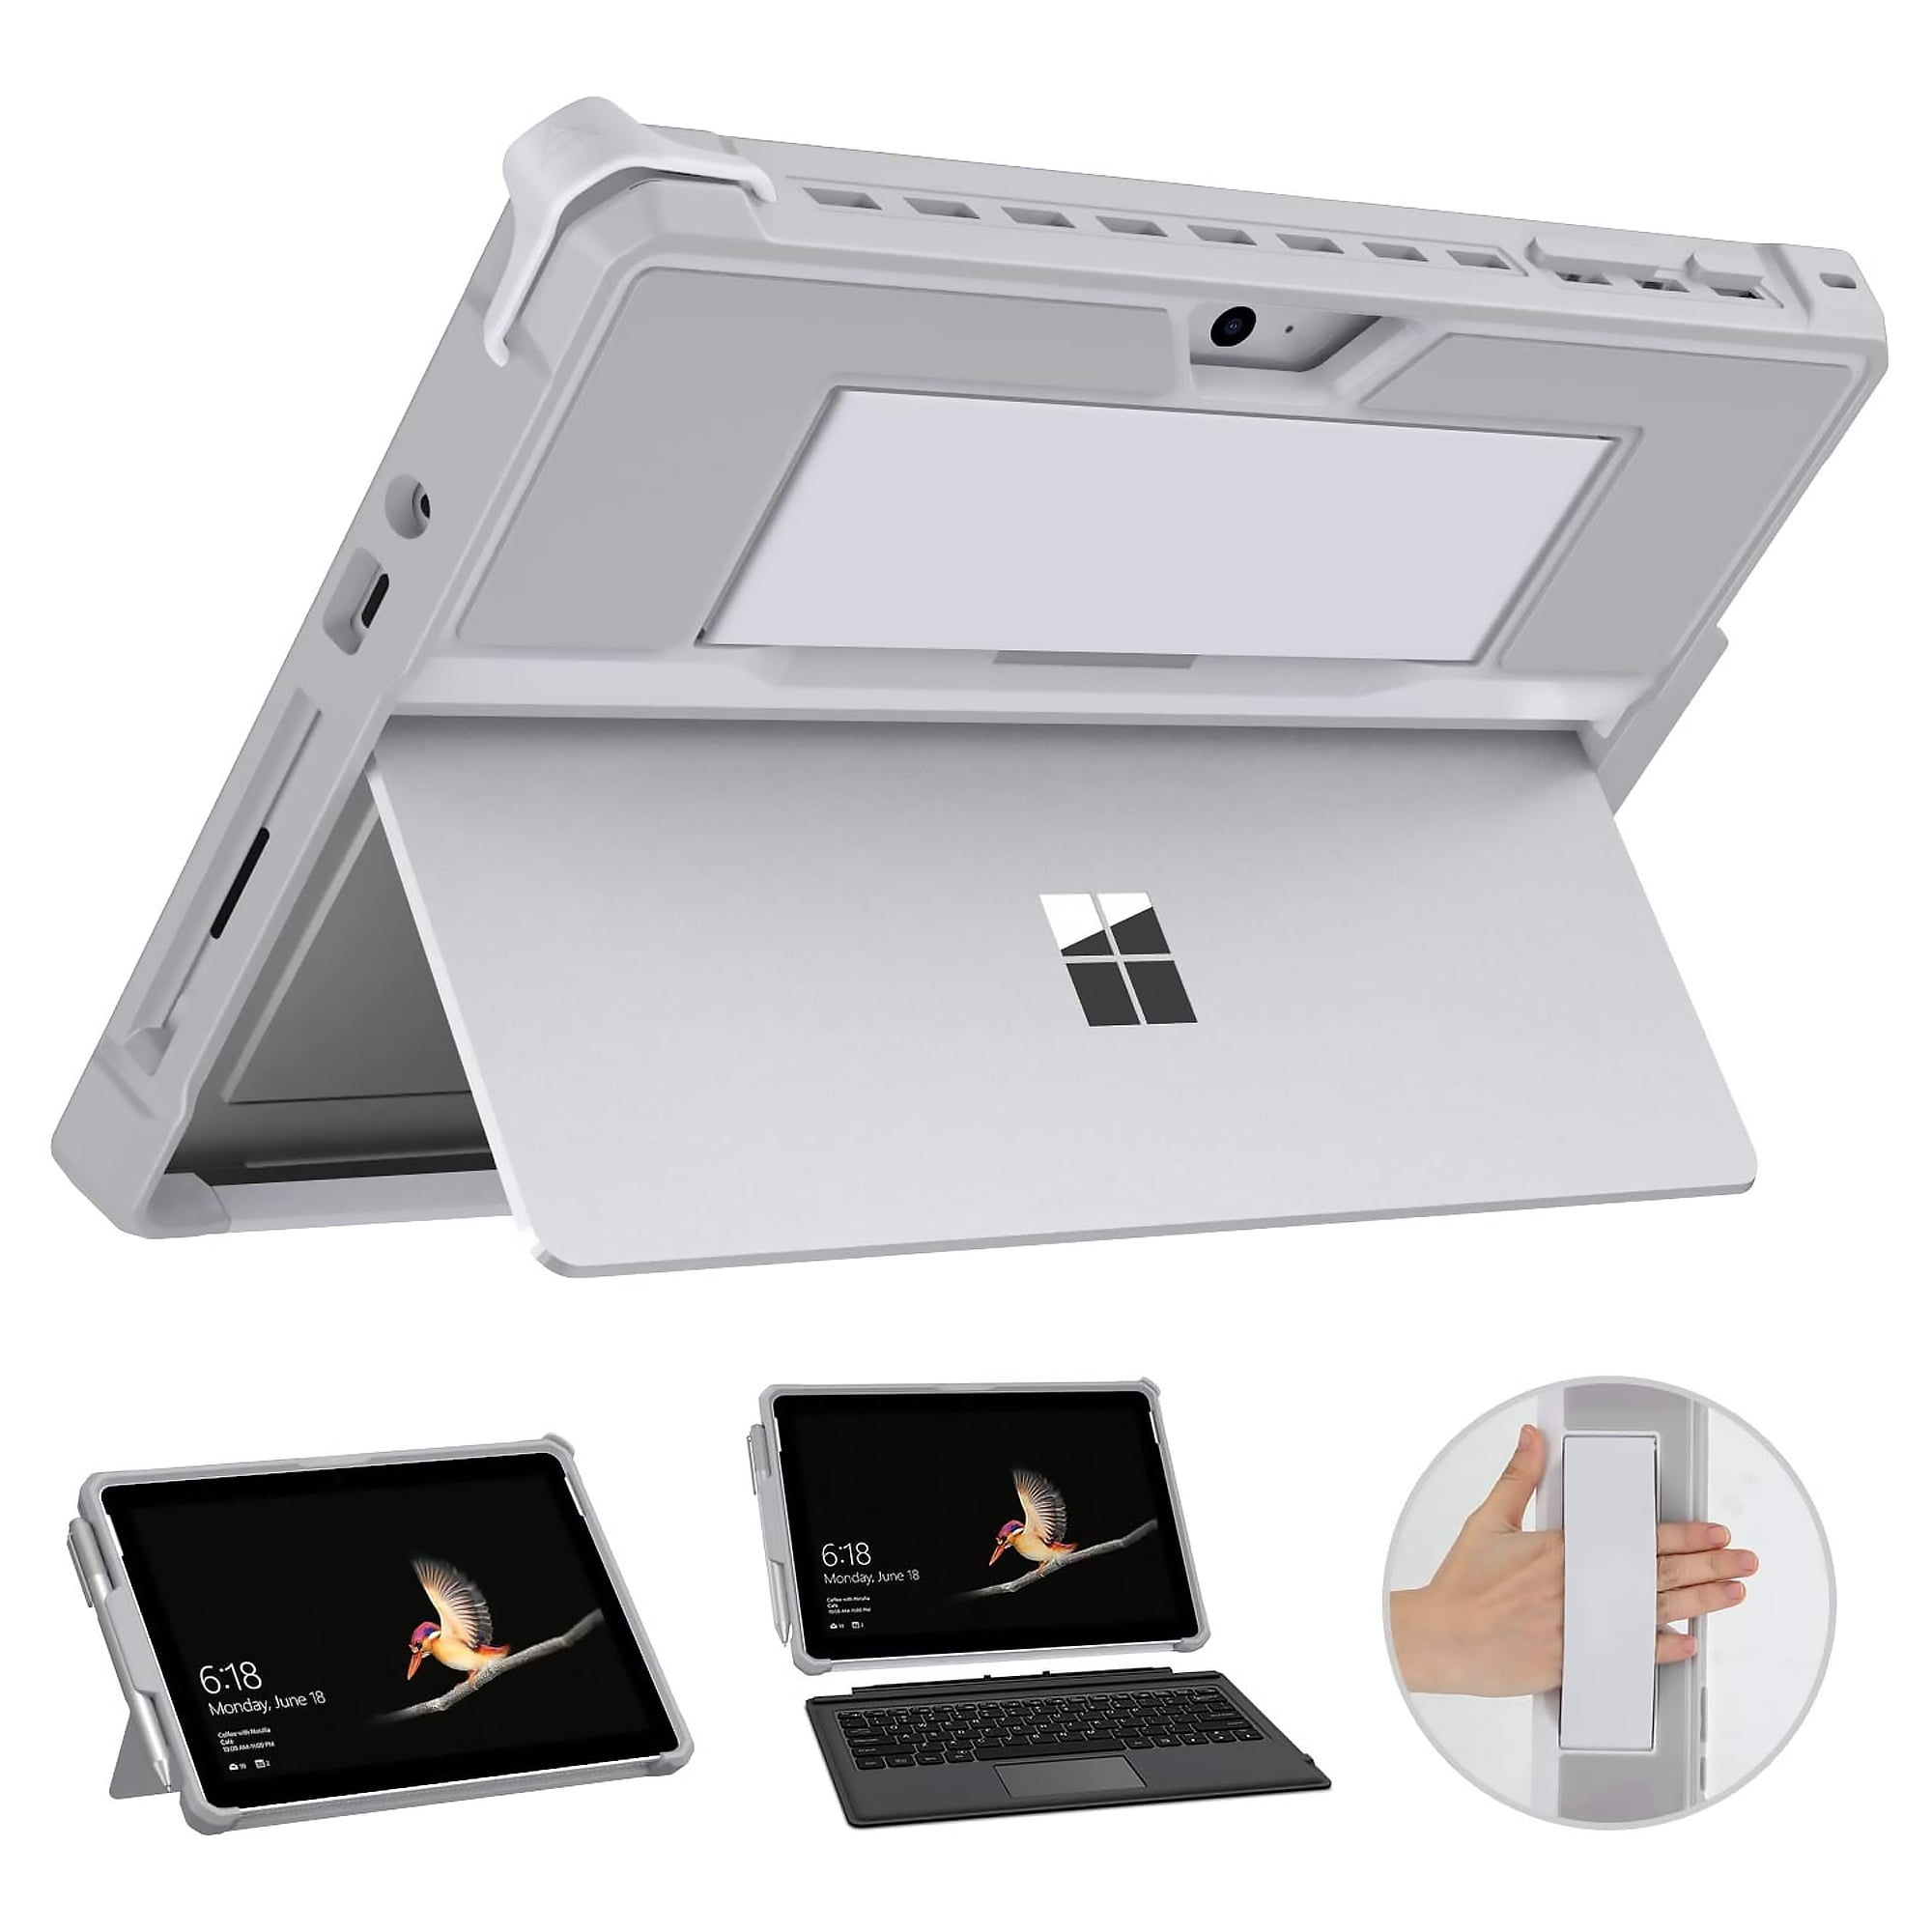 Sky Blue Starter Kit Microsoft Surface Go 10 Tablet Smart Case Available Free Screen Protector And Stylus Pen Included Prime Case With Keyboard Fast Delivery